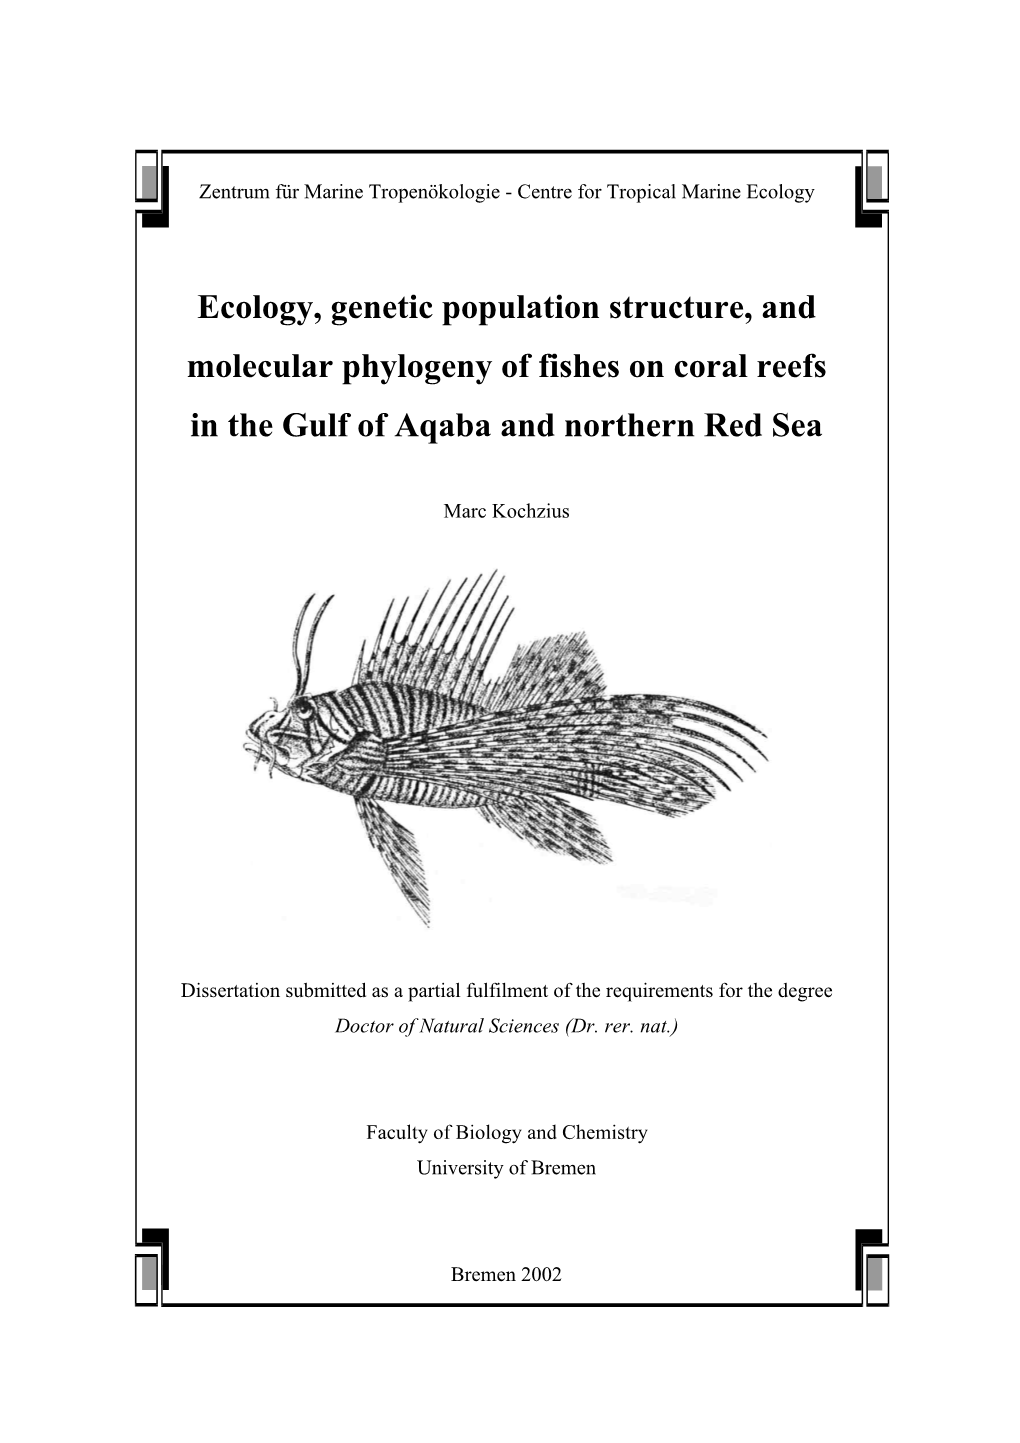 Ecology, Genetic Population Structure, and Molecular Phylogeny of Fishes on Coral Reefs in the Gulf of Aqaba and Northern Red Sea